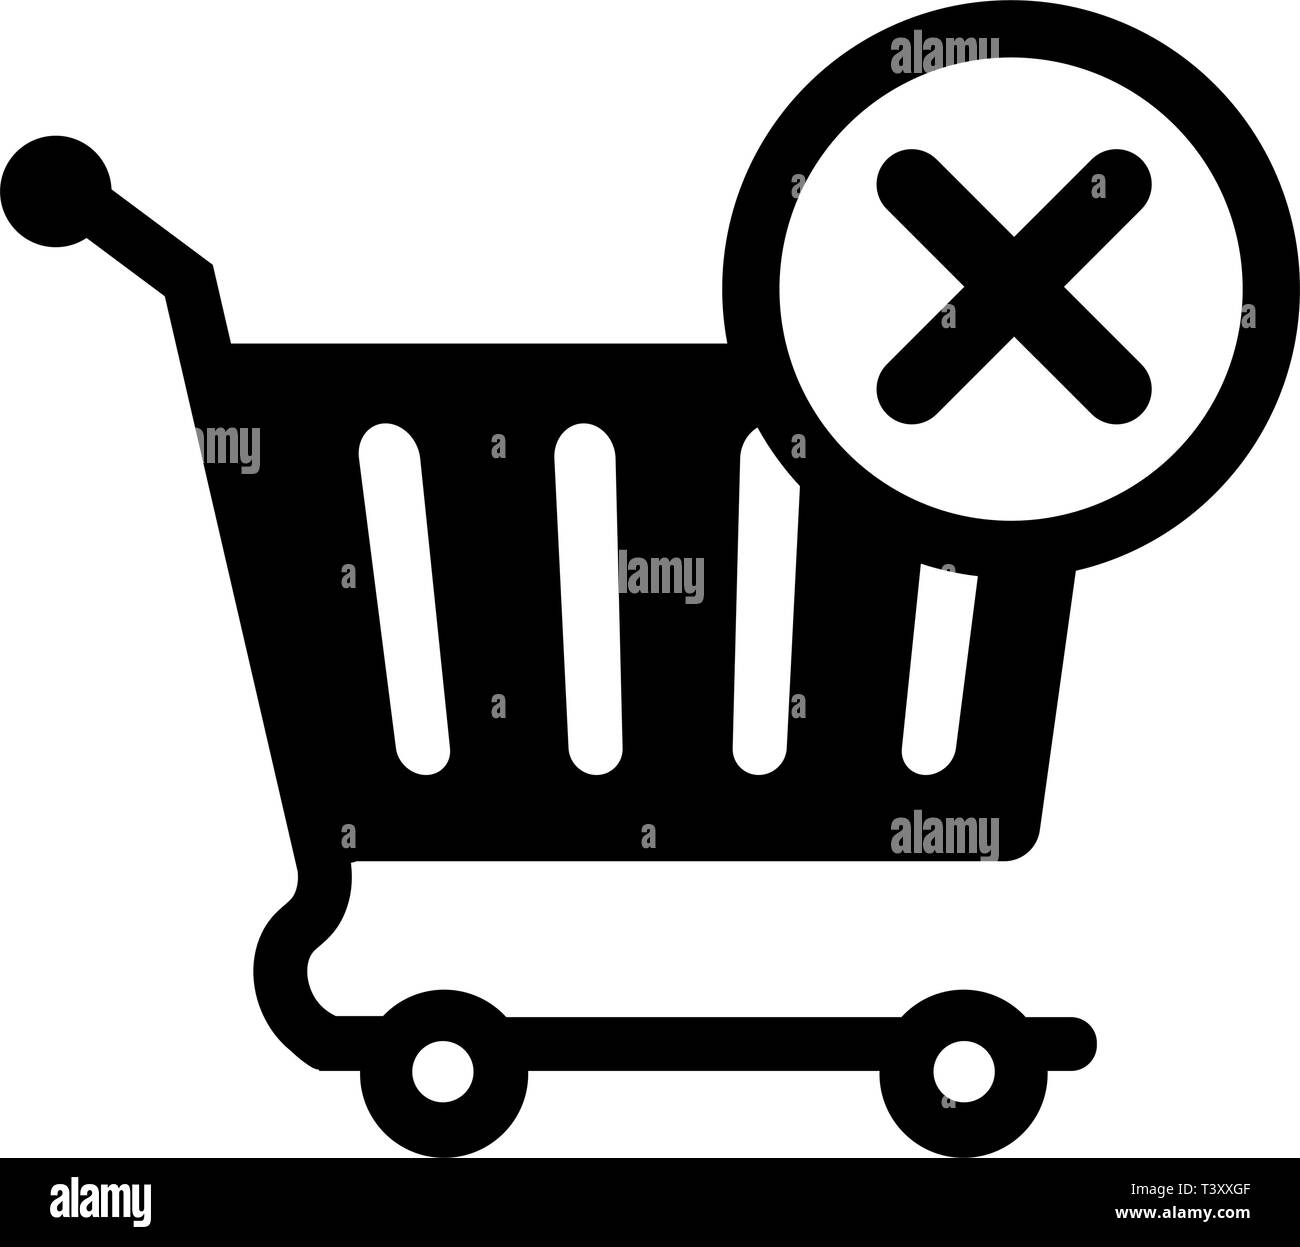 Remove From Cart Icon Vector Stock Vector